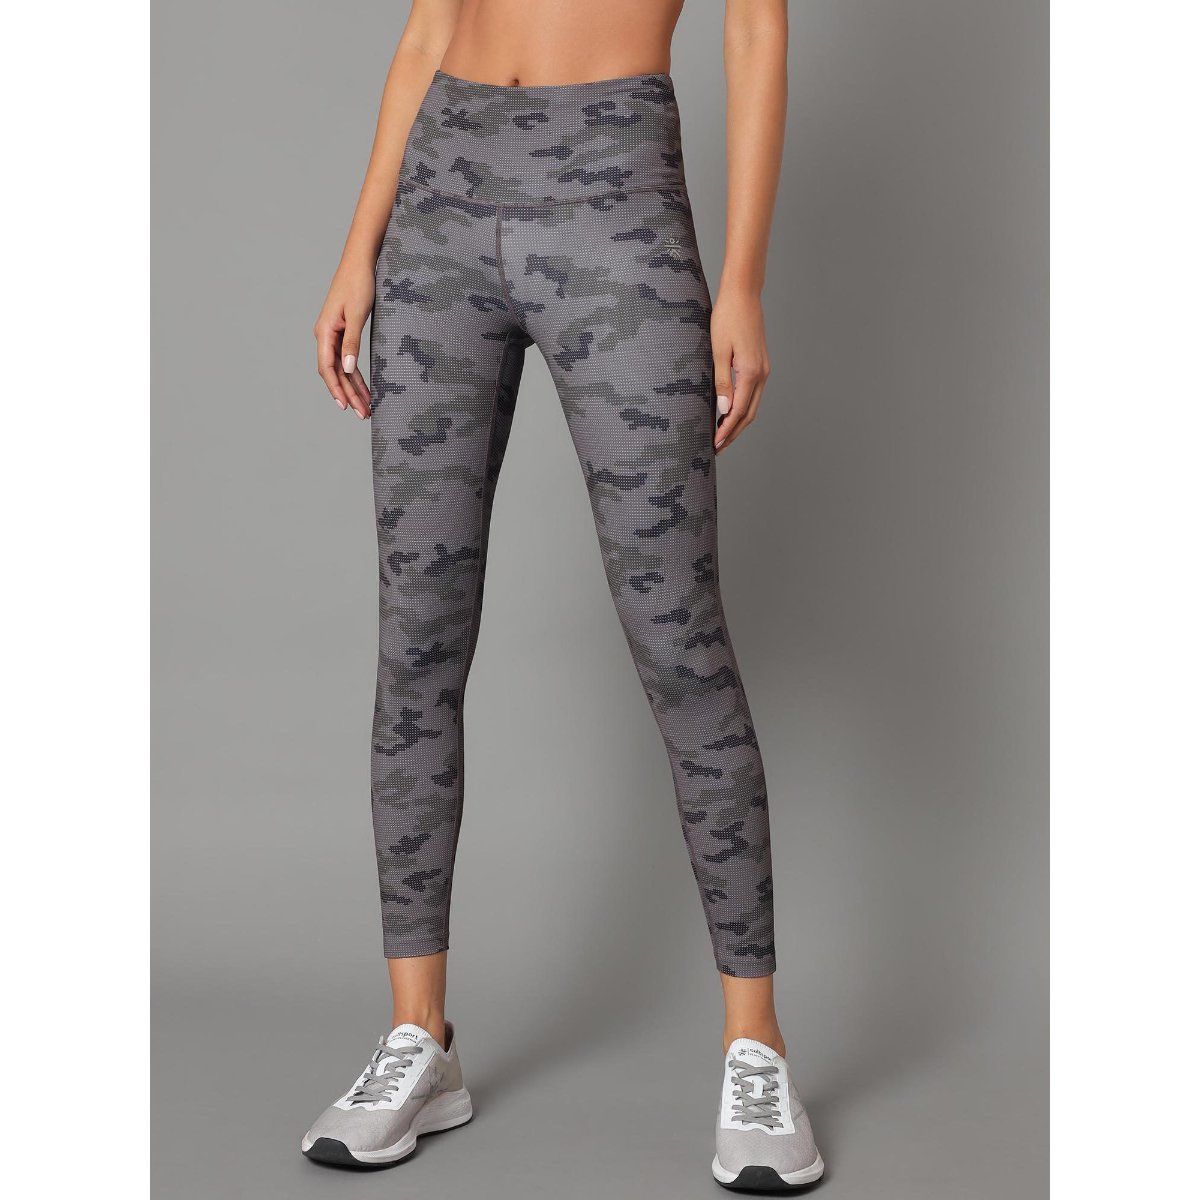 Womens Gray Camouflage Leggings | Yoga Pants | Athletic Apparel – MomMe and  More